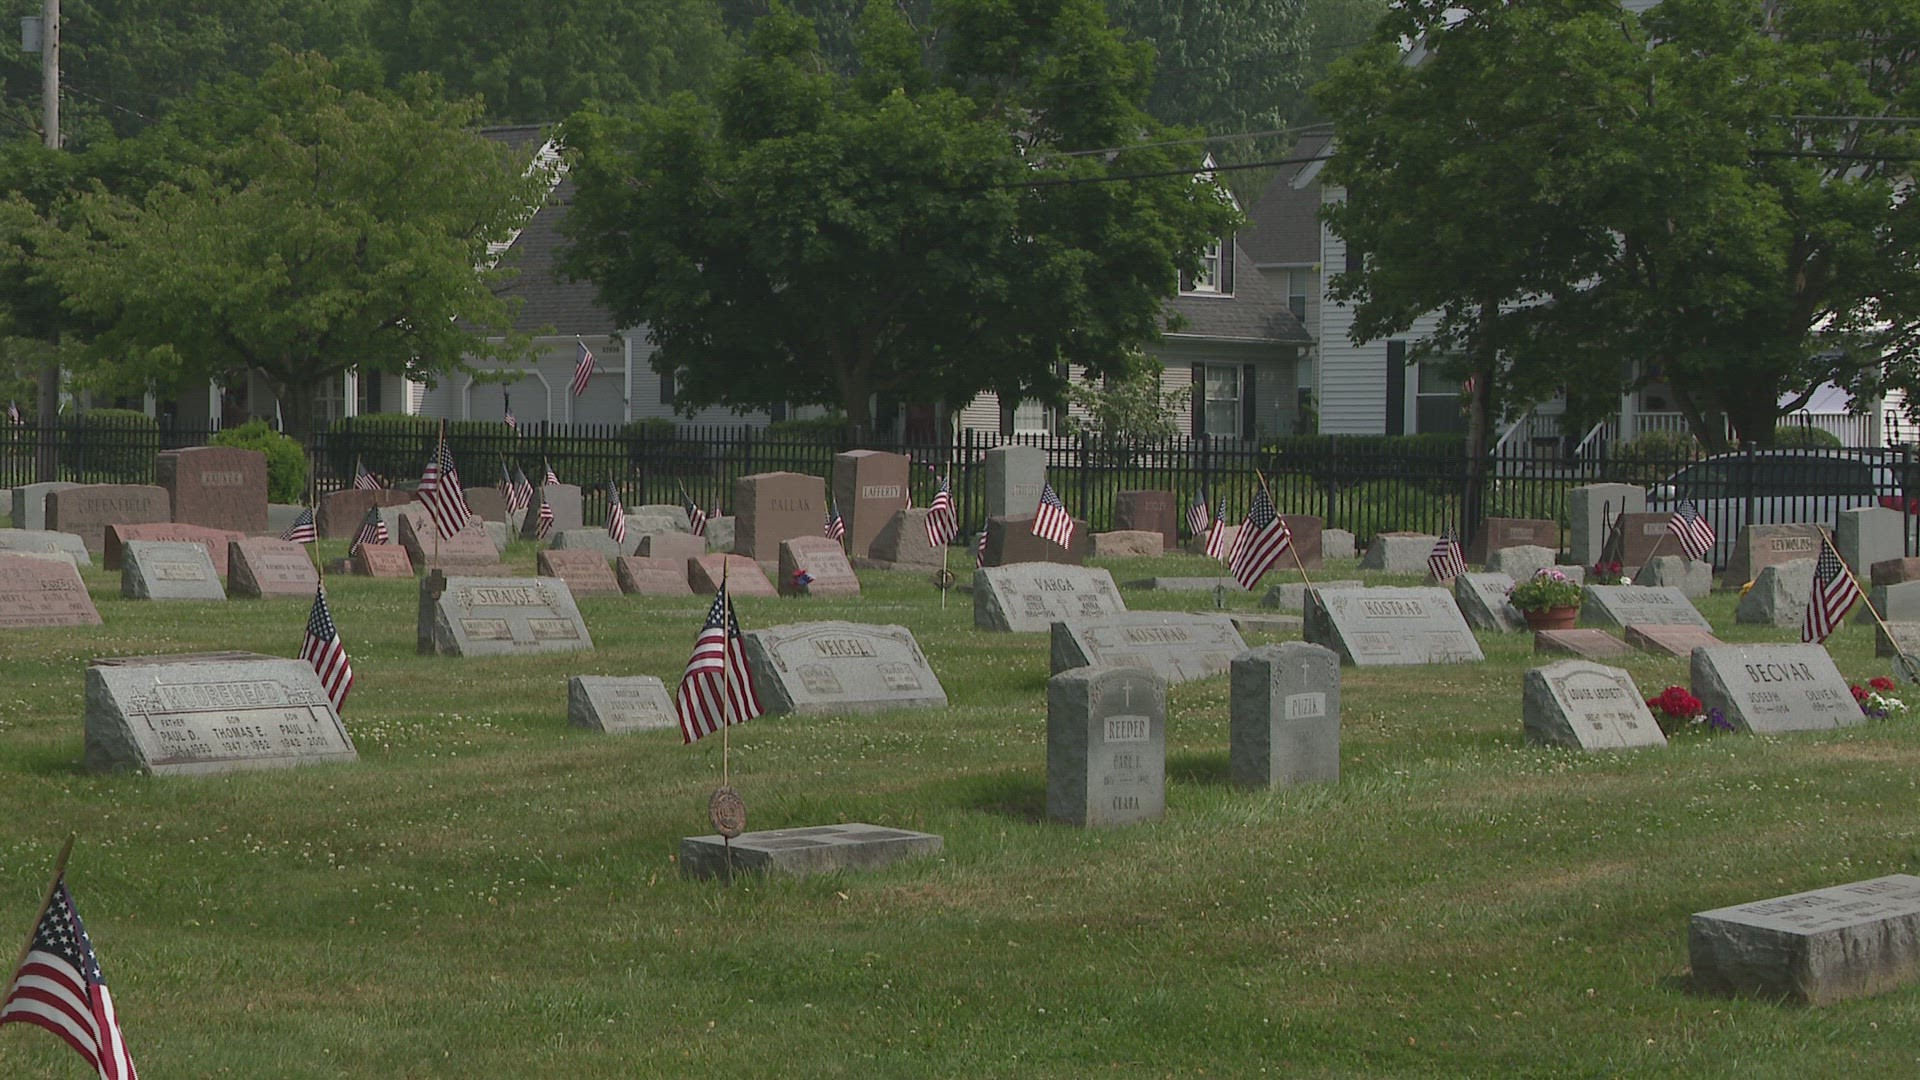 Around 16 U.S. flags that had been placed on graves for Memorial Day were tampered with. The flags were ripped off of their poles. Some were torn.